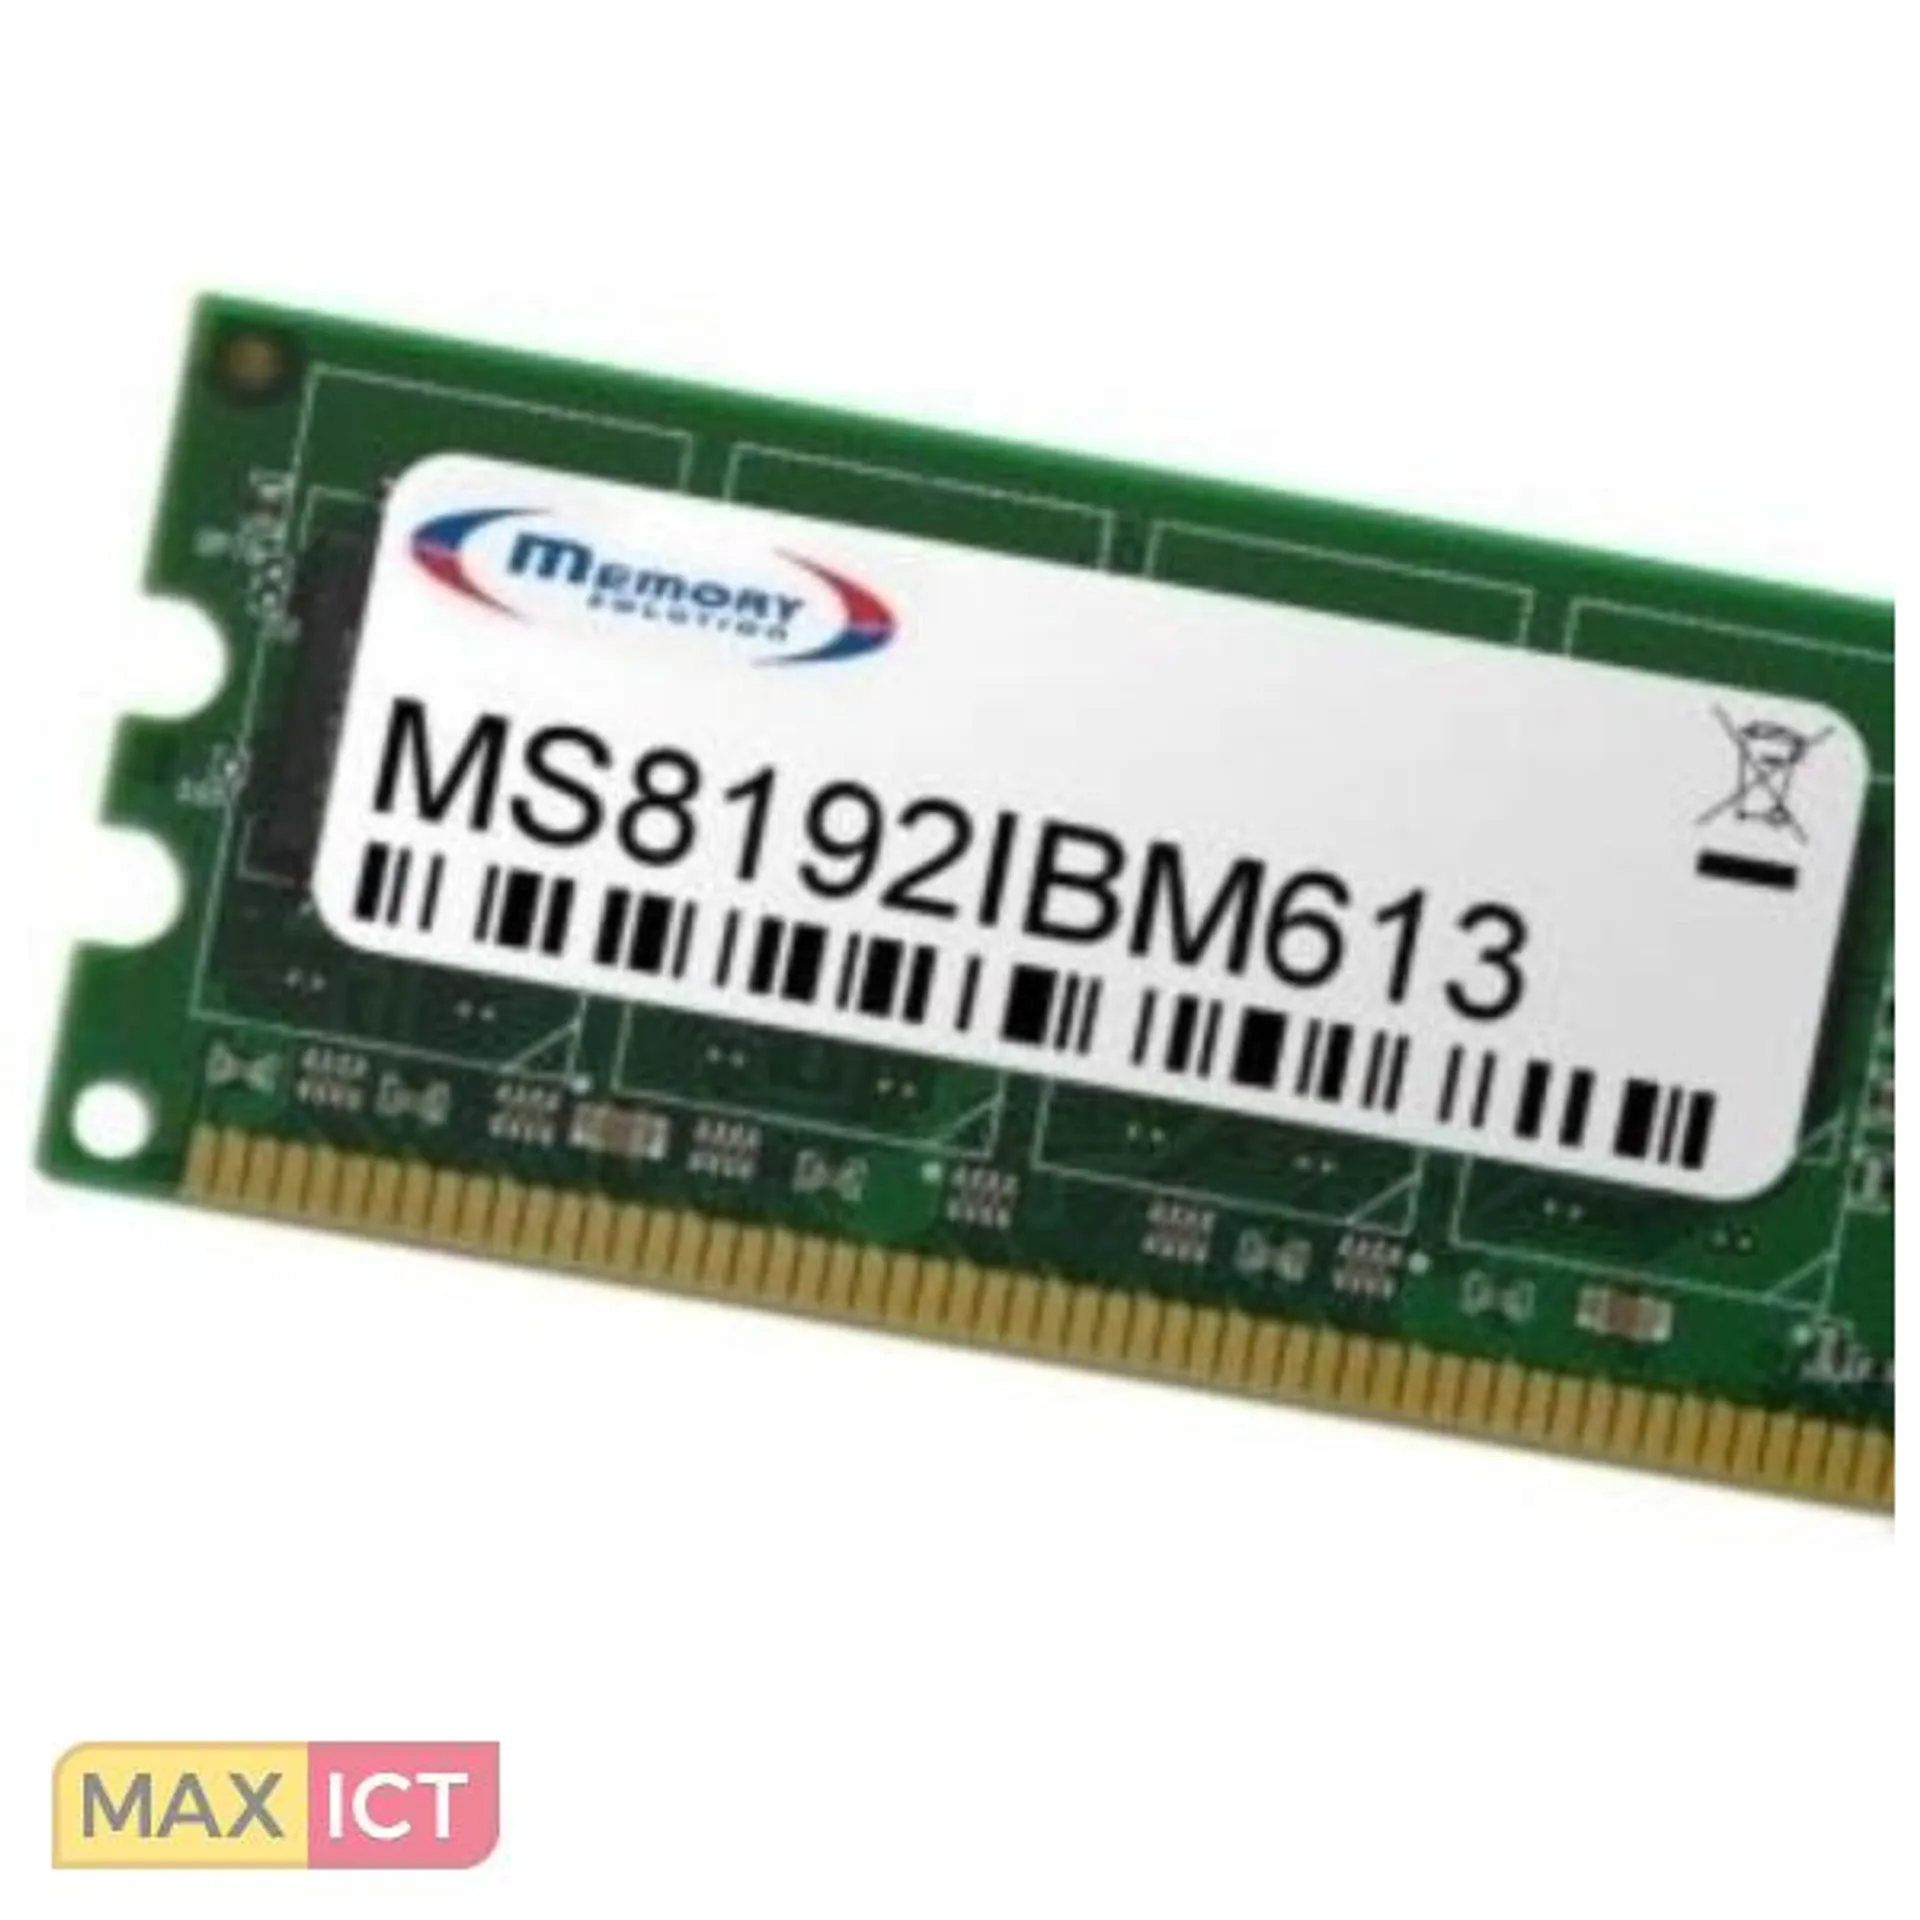 Max ICT Memory Solution MS8192IBM613 geheugenmodule 8 GB